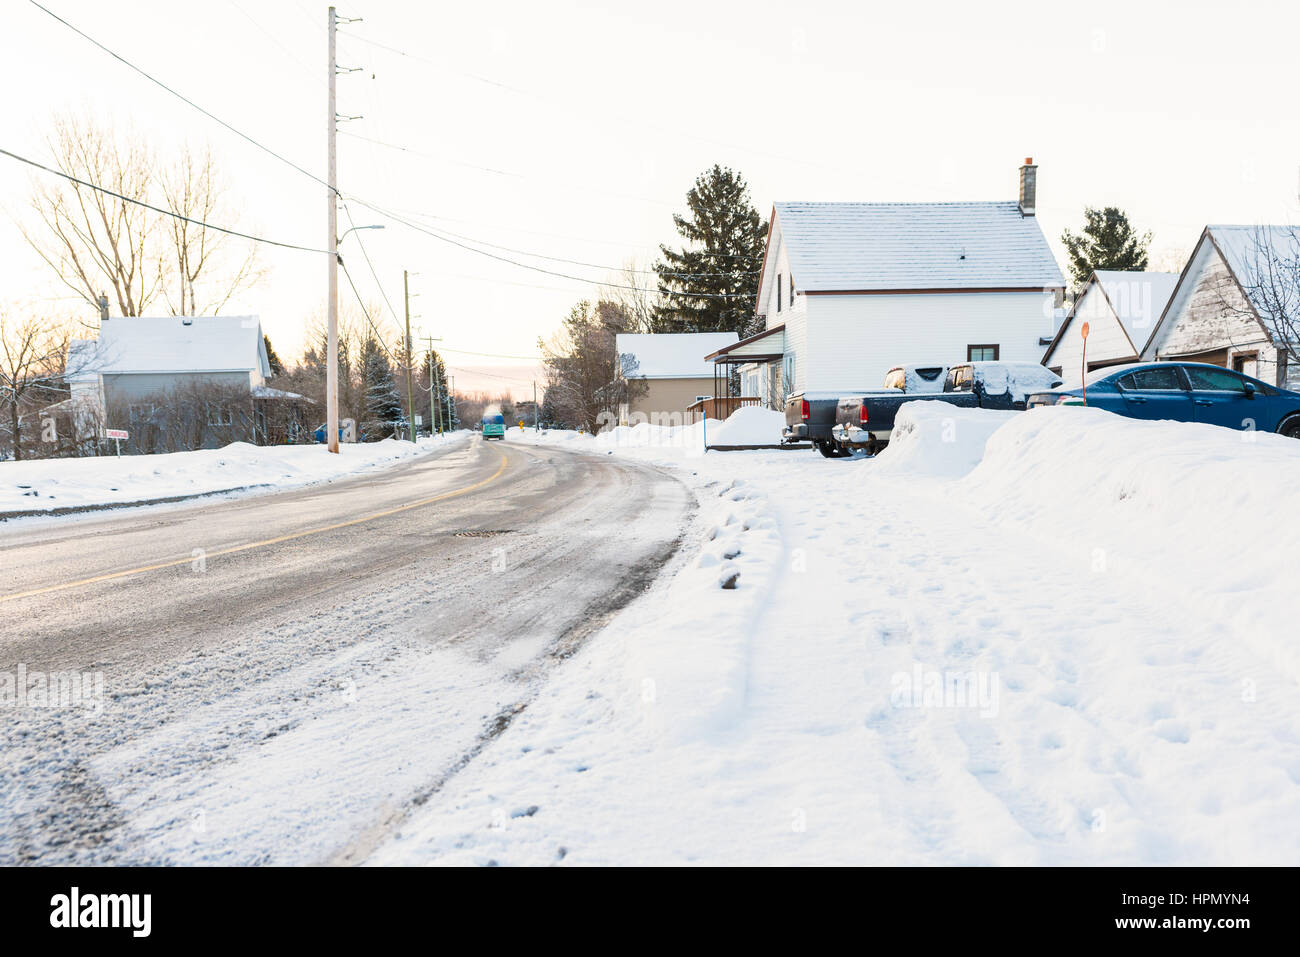 Houses and cars covered in snow in sub-zero conditions in Canadian country town in winter Stock Photo